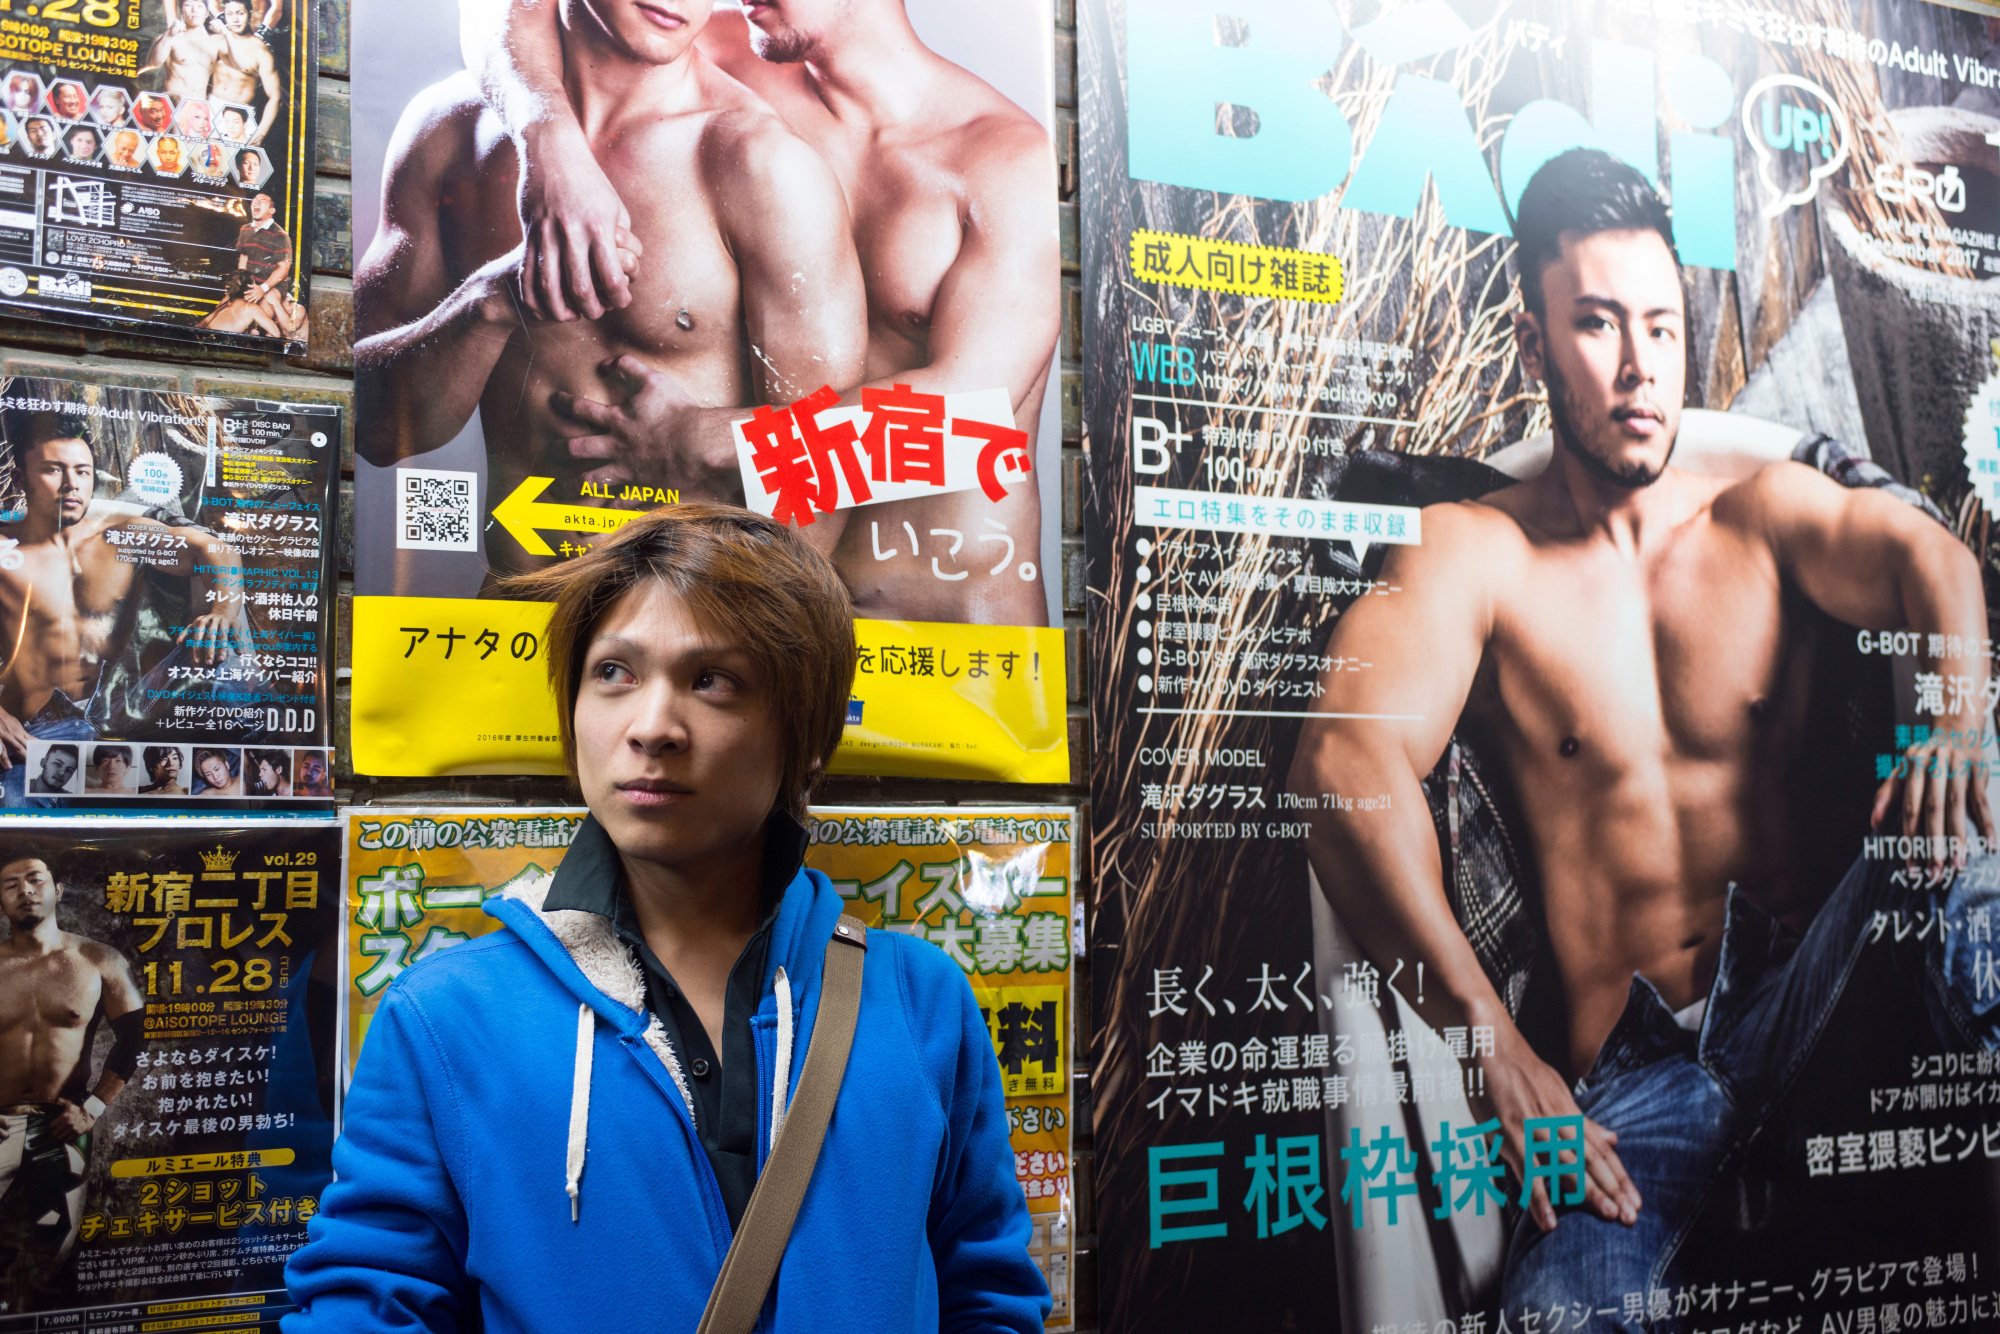 Boys for rent in Tokyo Sex, lies and vulnerable young lives